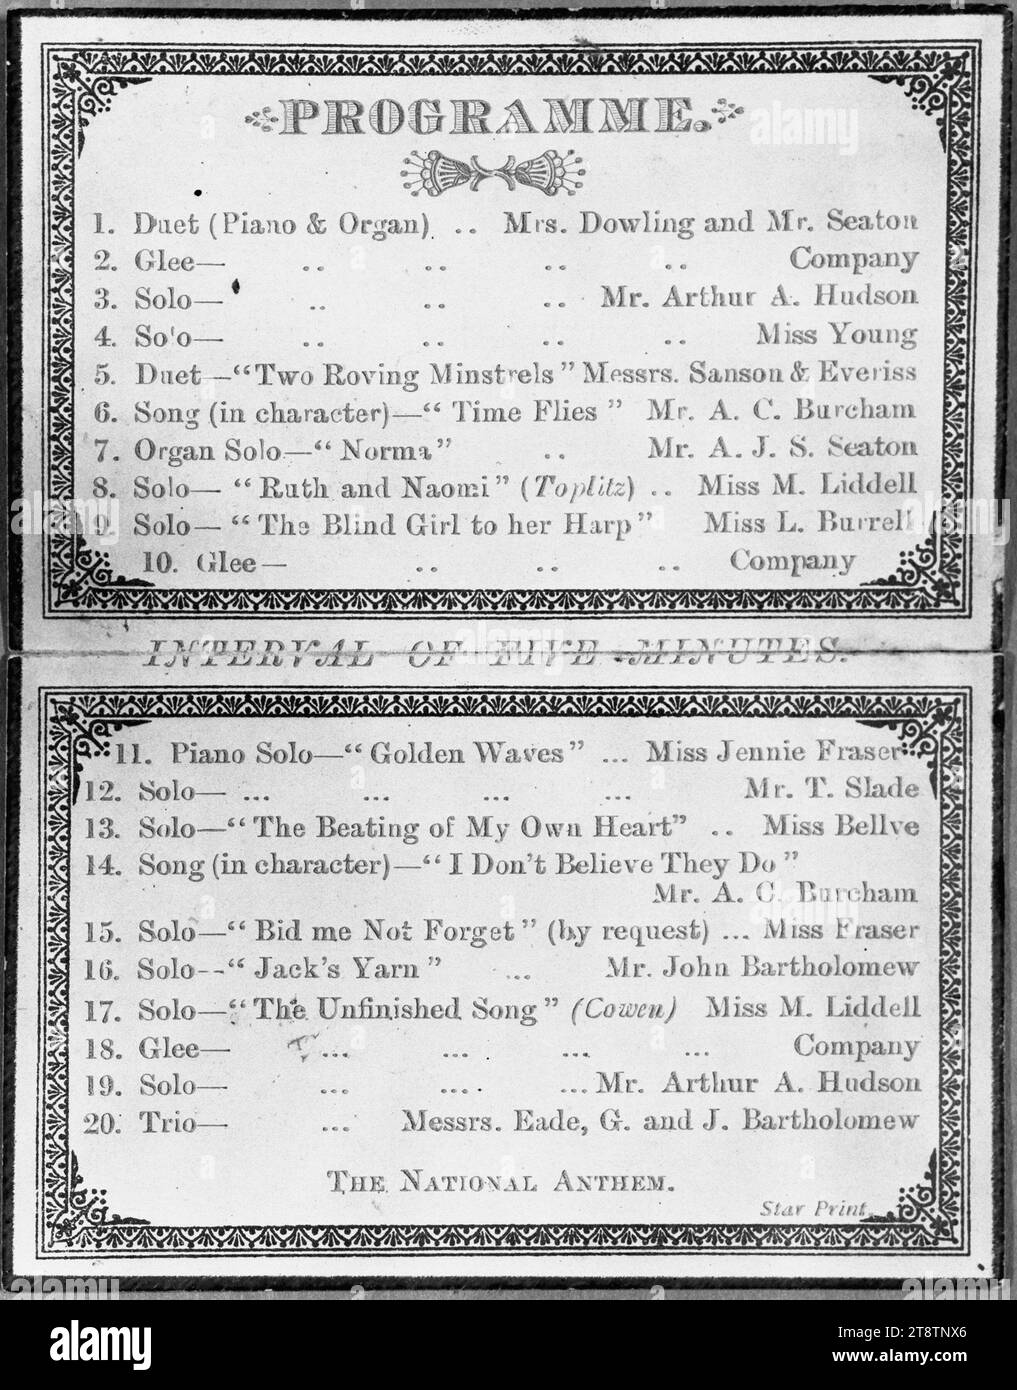 Town Hall Feilding: Local and Instrumental Concert, Friday Aug. 17, 1883. Programme and ticket. Inside, Lists twenty items performed, including musical numbers by Mrs Dowling, Mr A J S Seaton, Mr Arthur A Hudson, Mr Sanson, Mr Everiss, Mr A C Burcham, Miss M Liddell, Miss L Burrell, Miss Jennie Fraser, Mr T Slade, Miss Bellve, Mr John Bartholomew, Messrs Eade and G Bartholomew Stock Photo